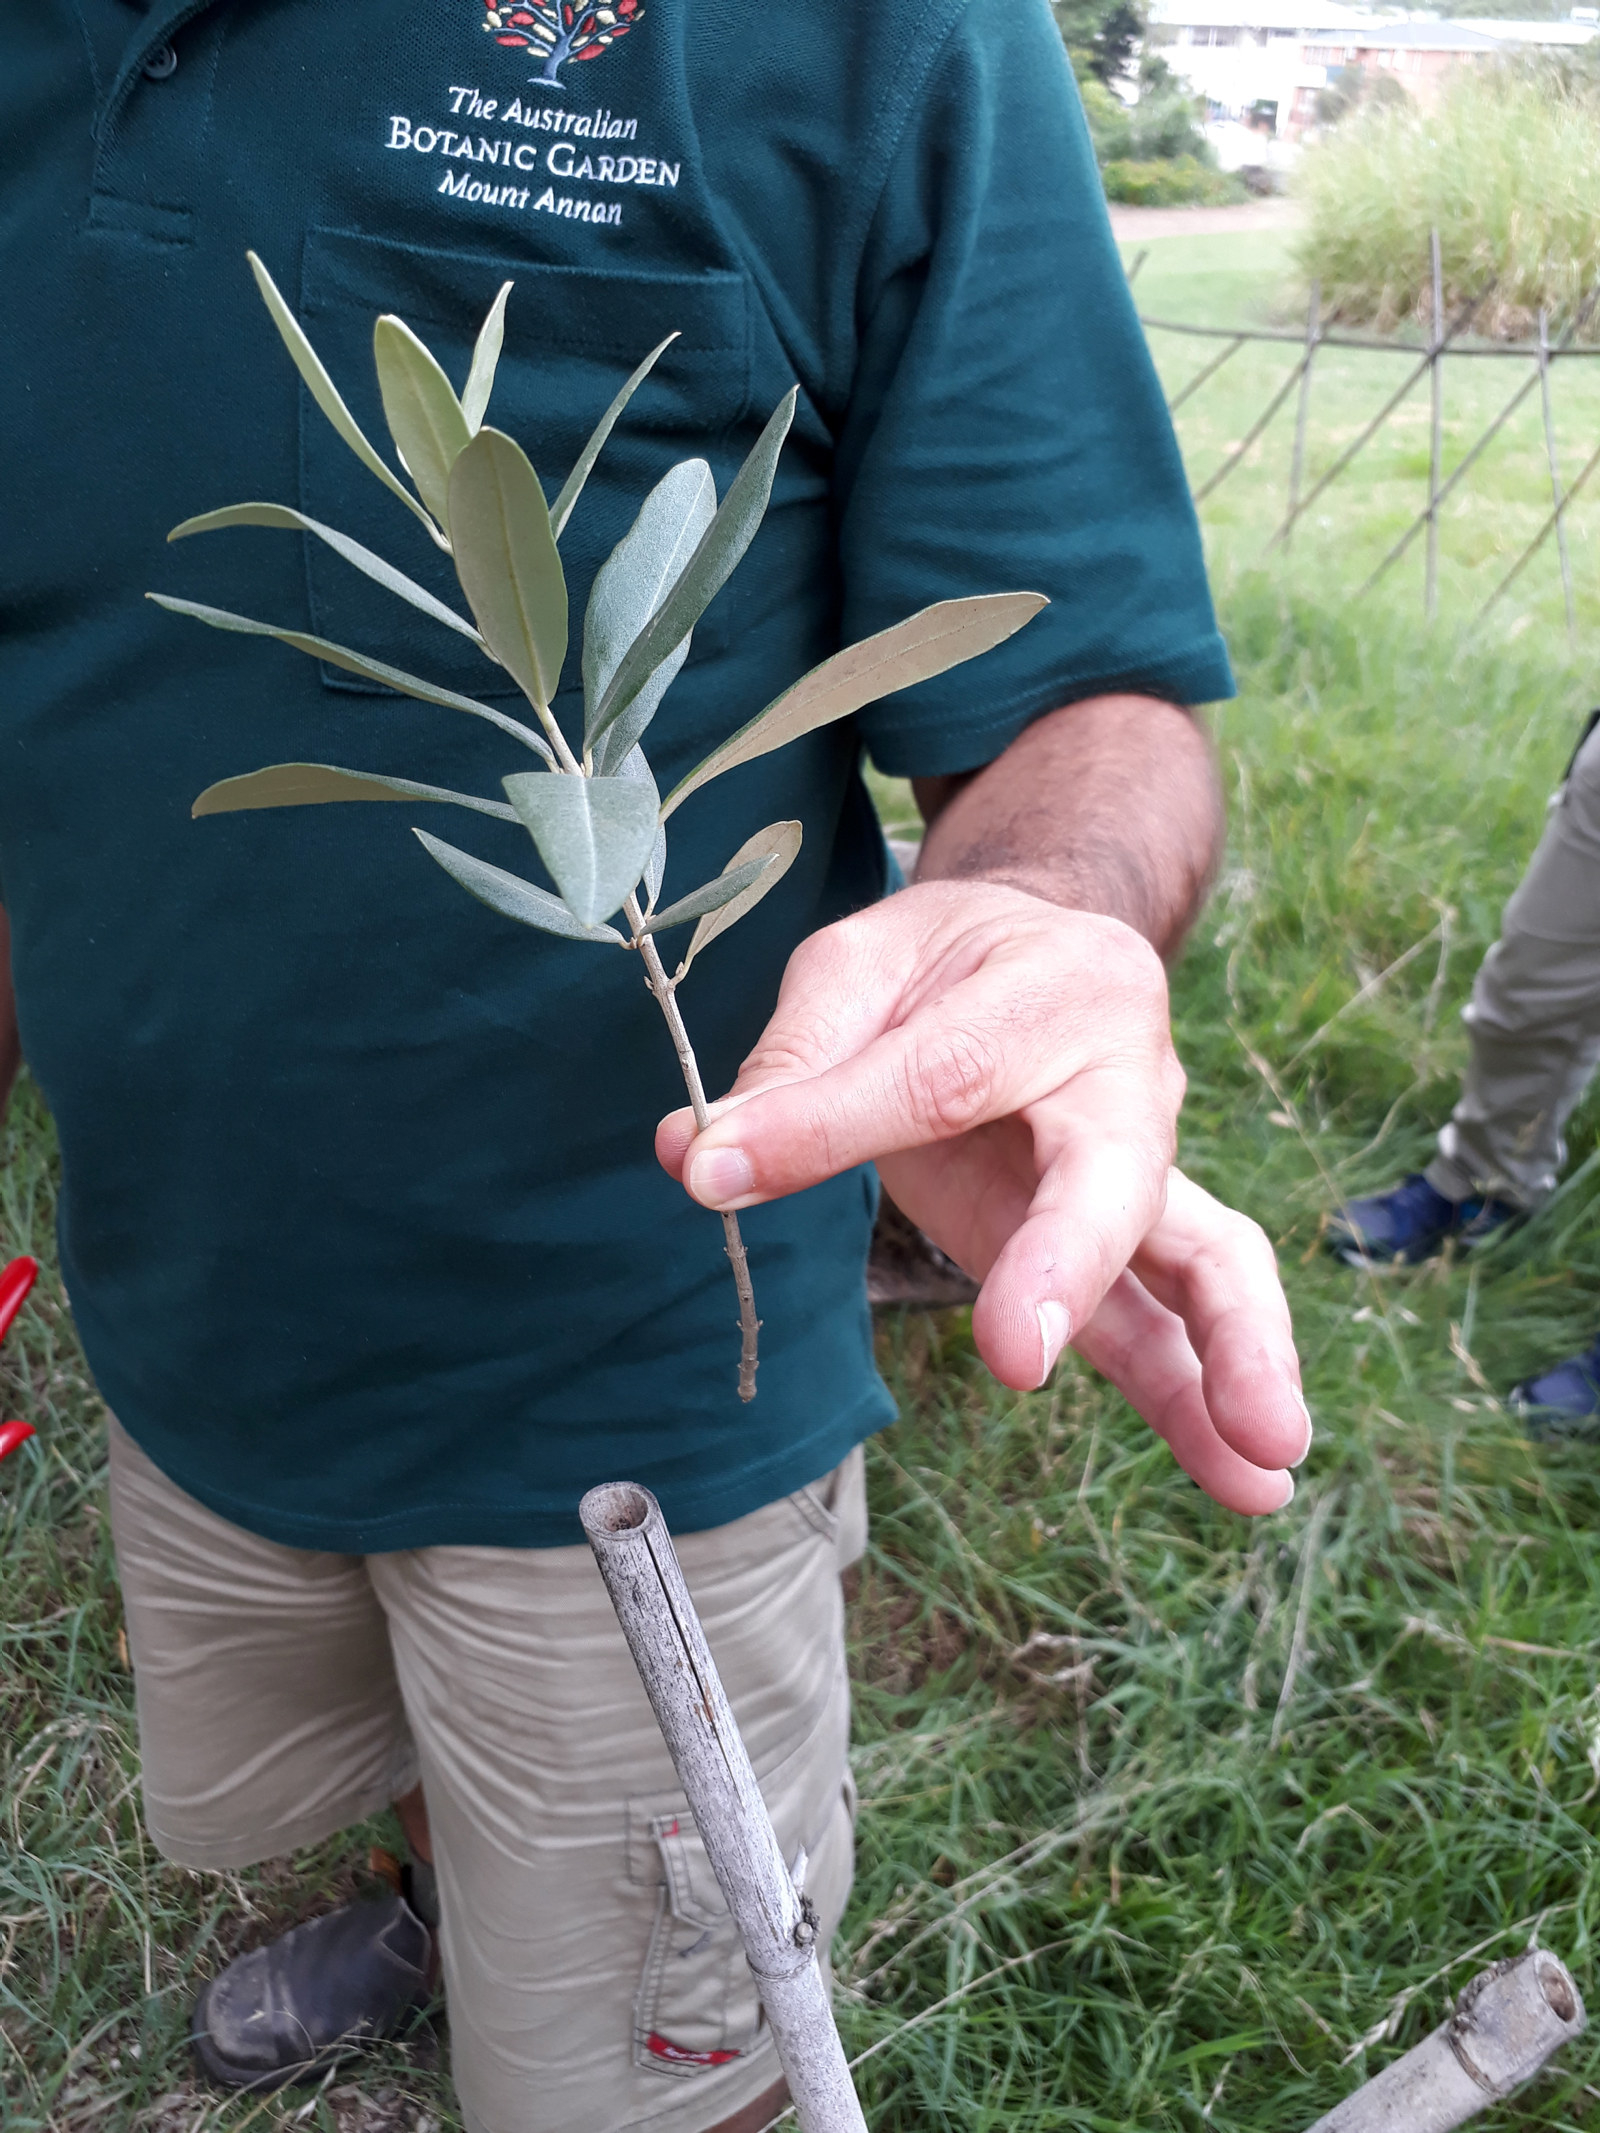 Mark from the Australian Botanic Garden, Mount Annan, shows us the size and type of cutting taken from the Elizabeth Farm Olive tree.